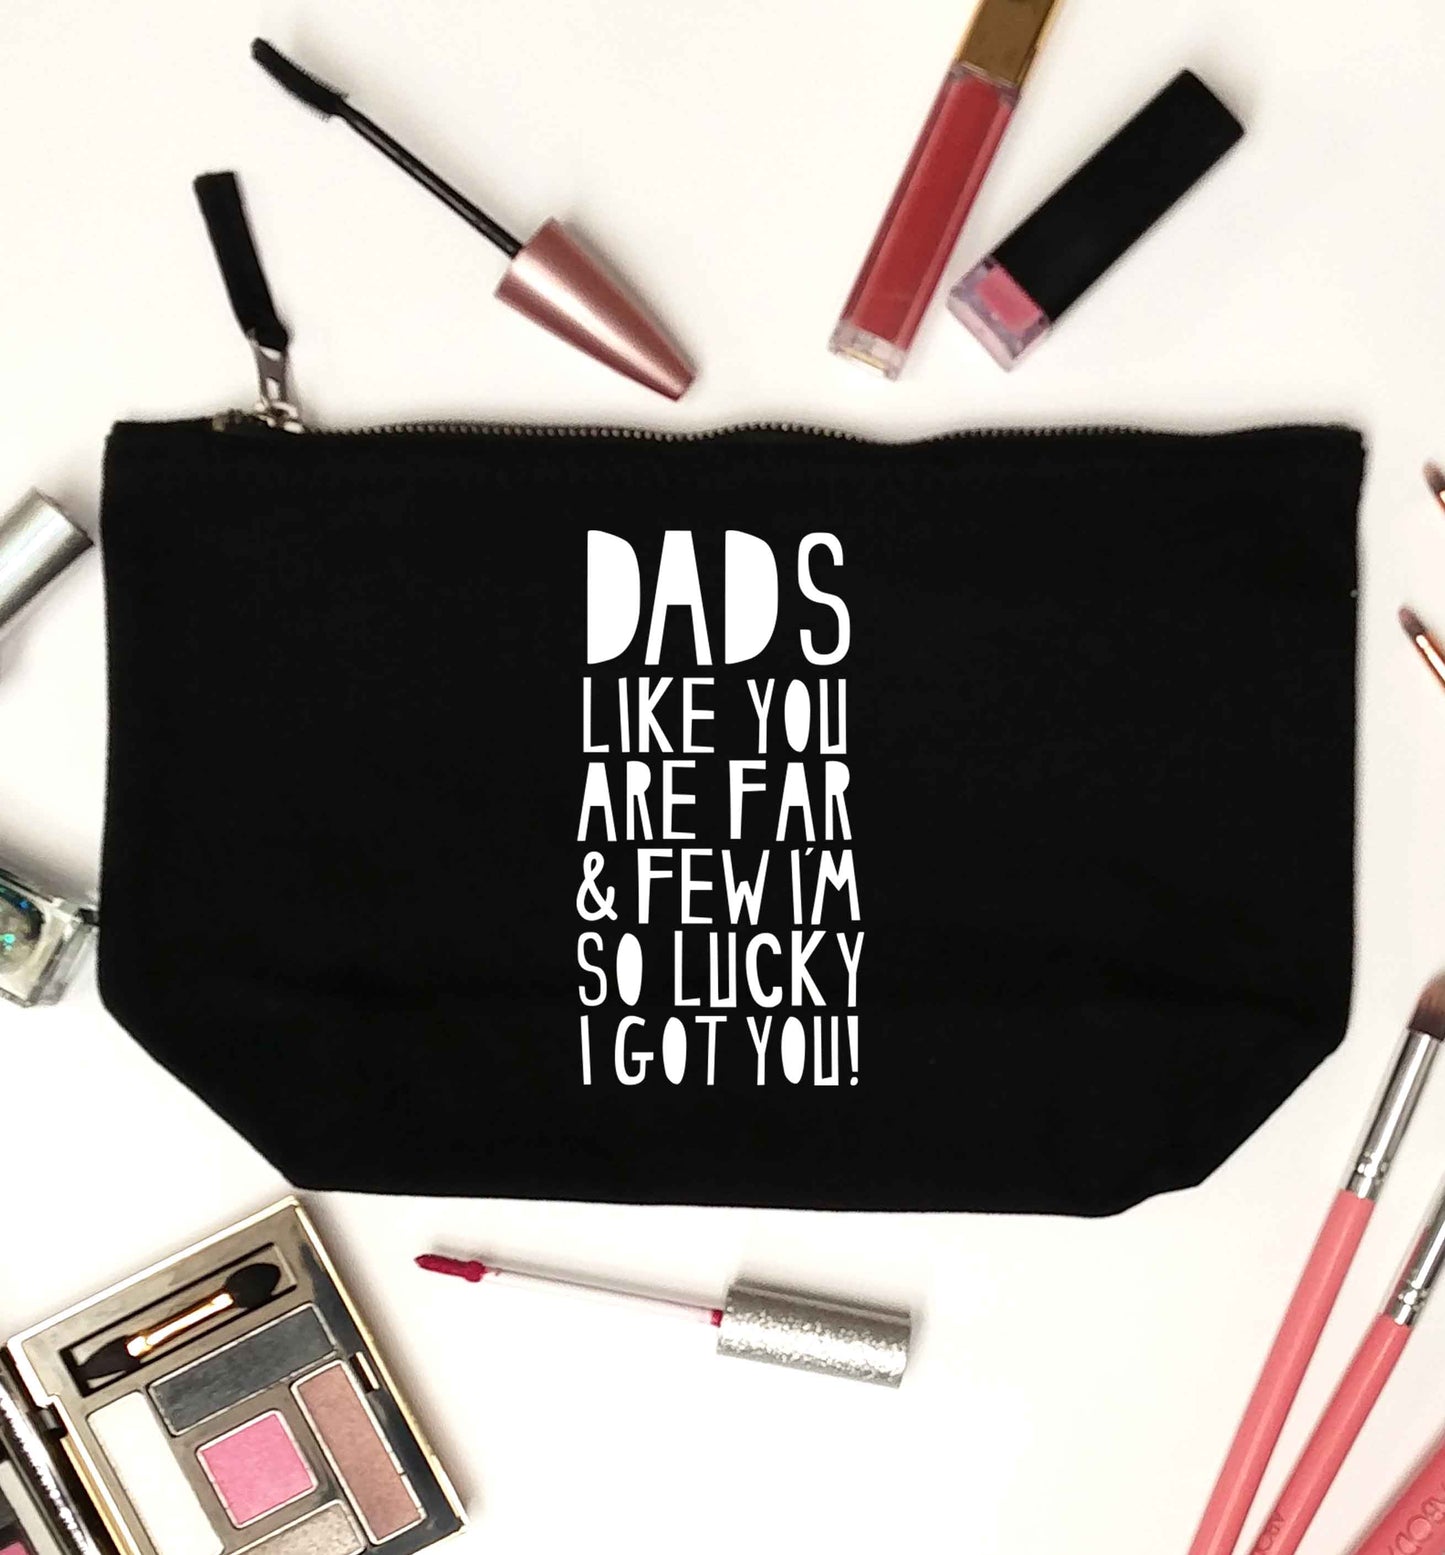 Dads like you are far and few I'm so luck I got you! black makeup bag